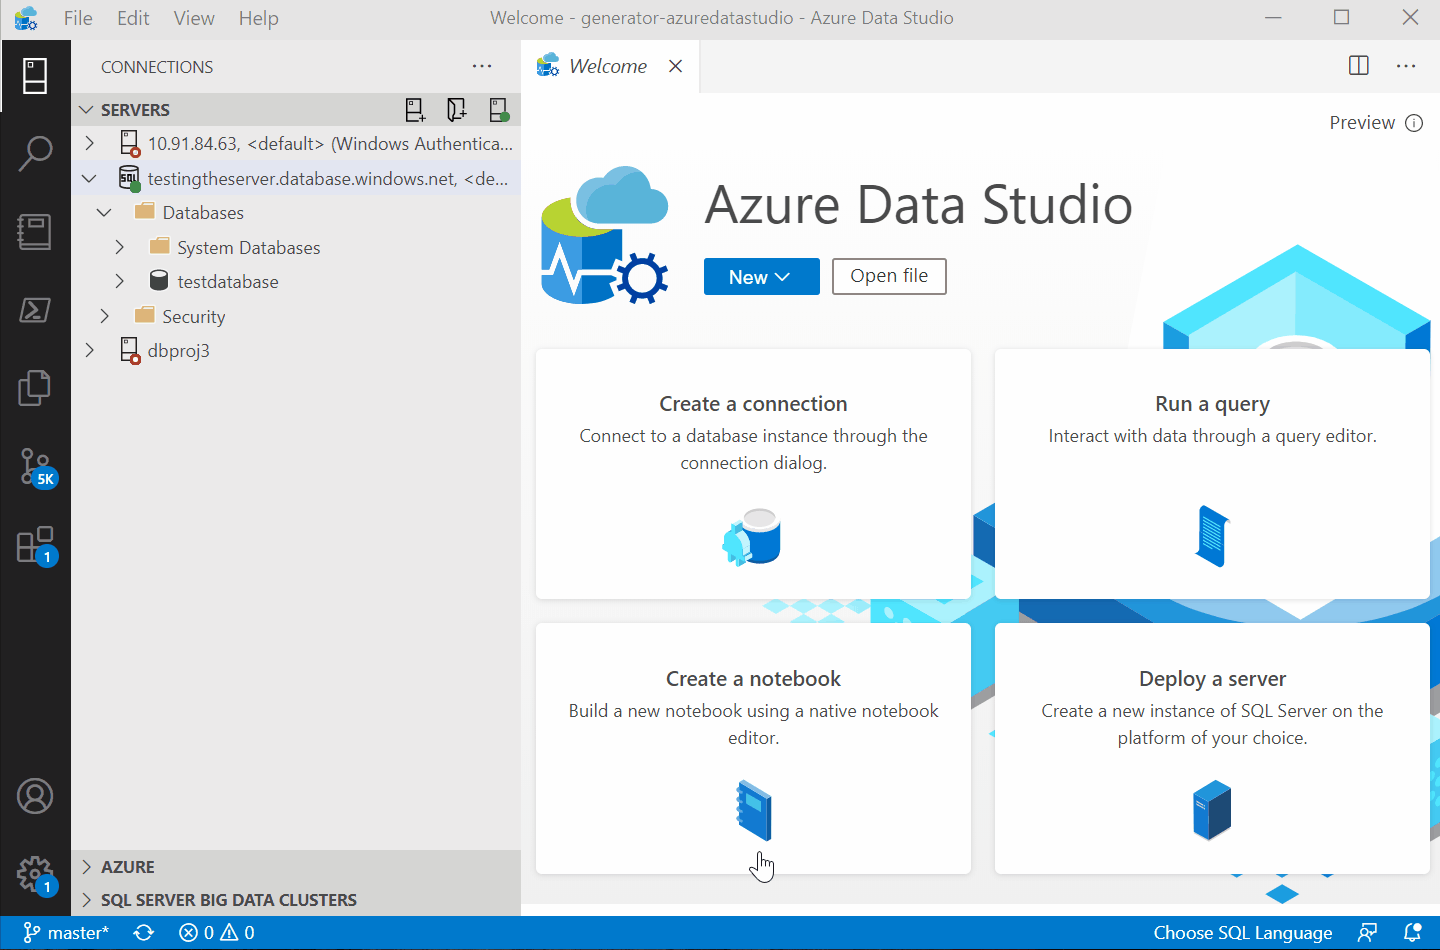 Screenshot that shows dashboards introduction.